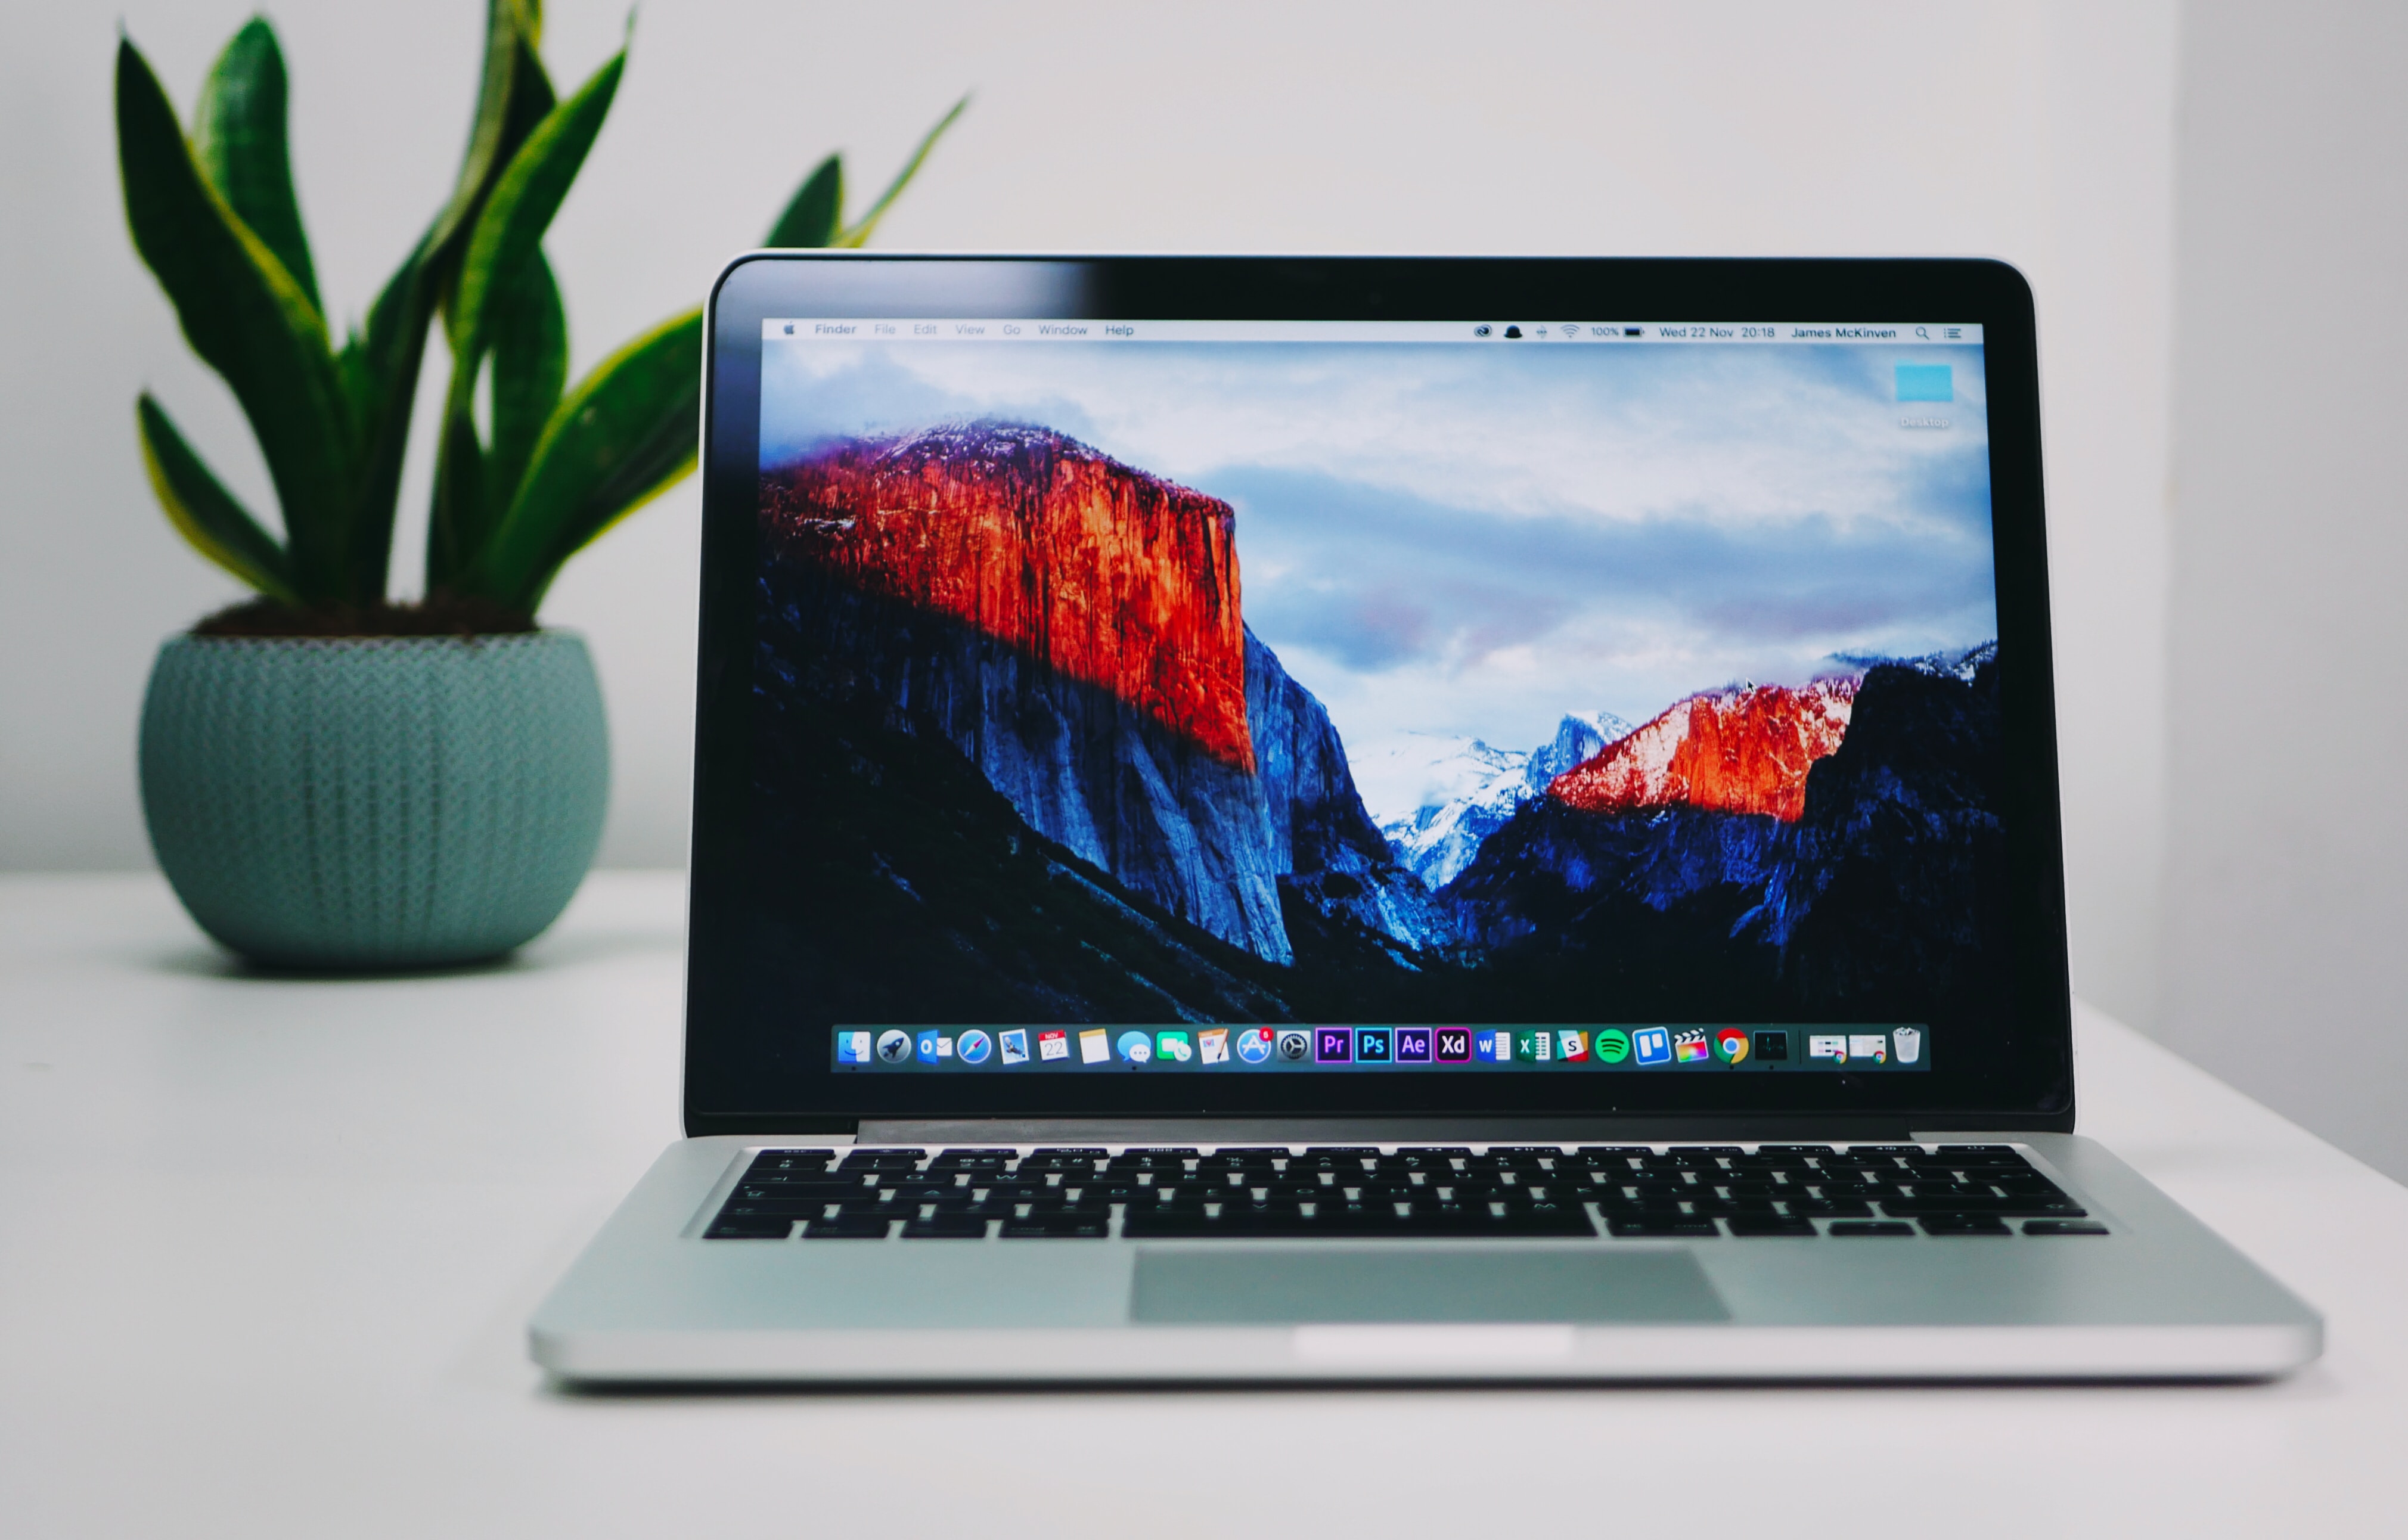 How To Check Storage On Mac